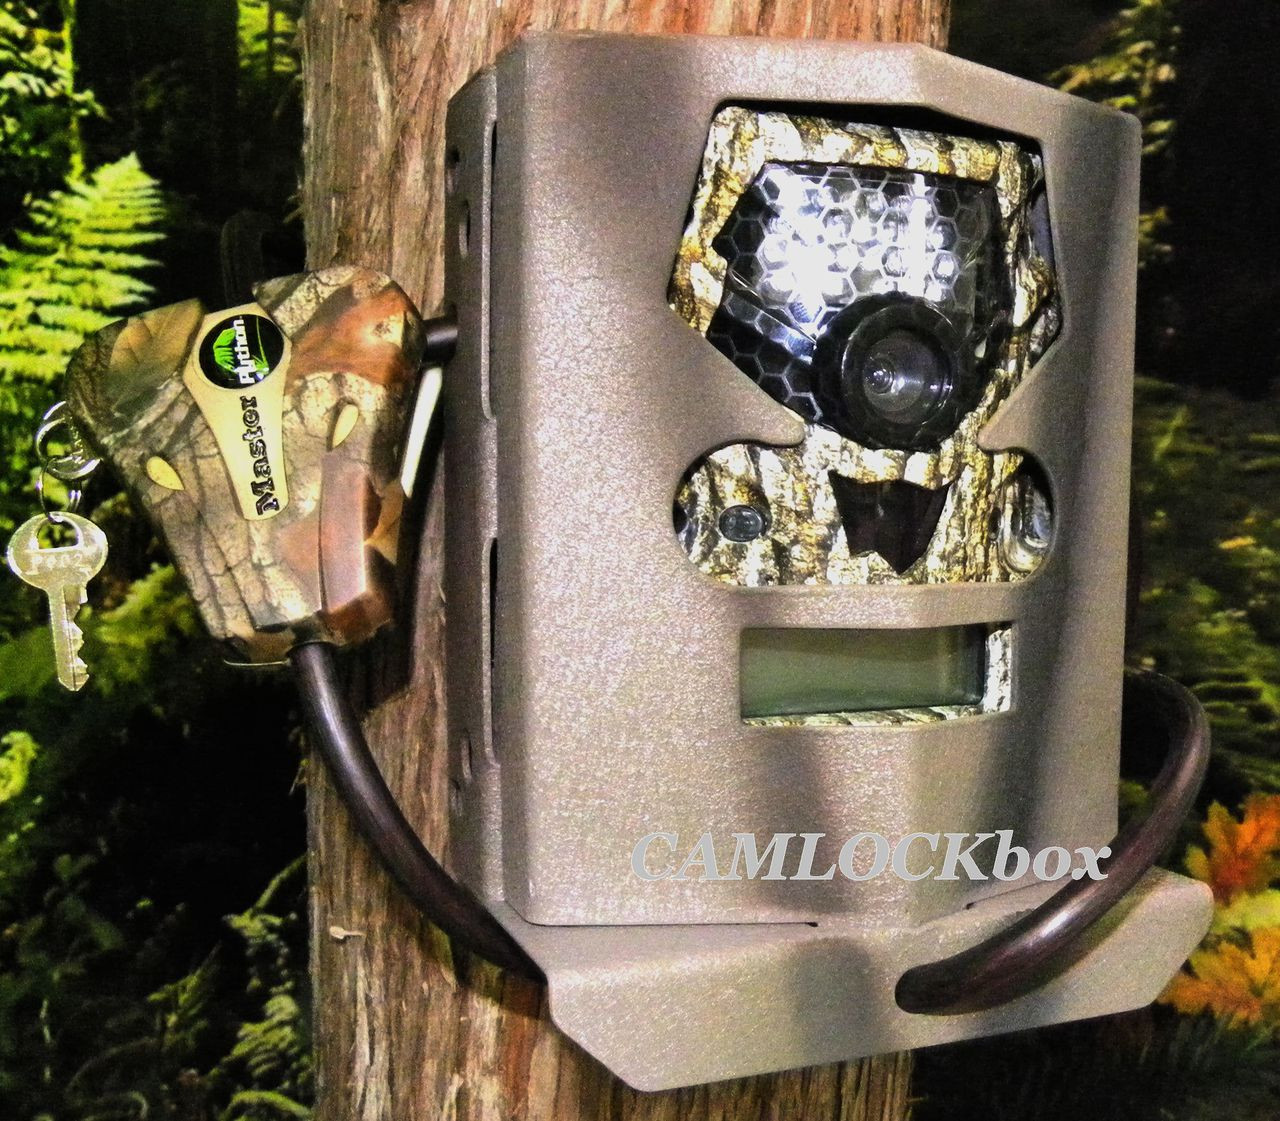 2620A Used Wildgame Innovations Vision 14 Game Trail Camera 14 MP V14i7b2-7 